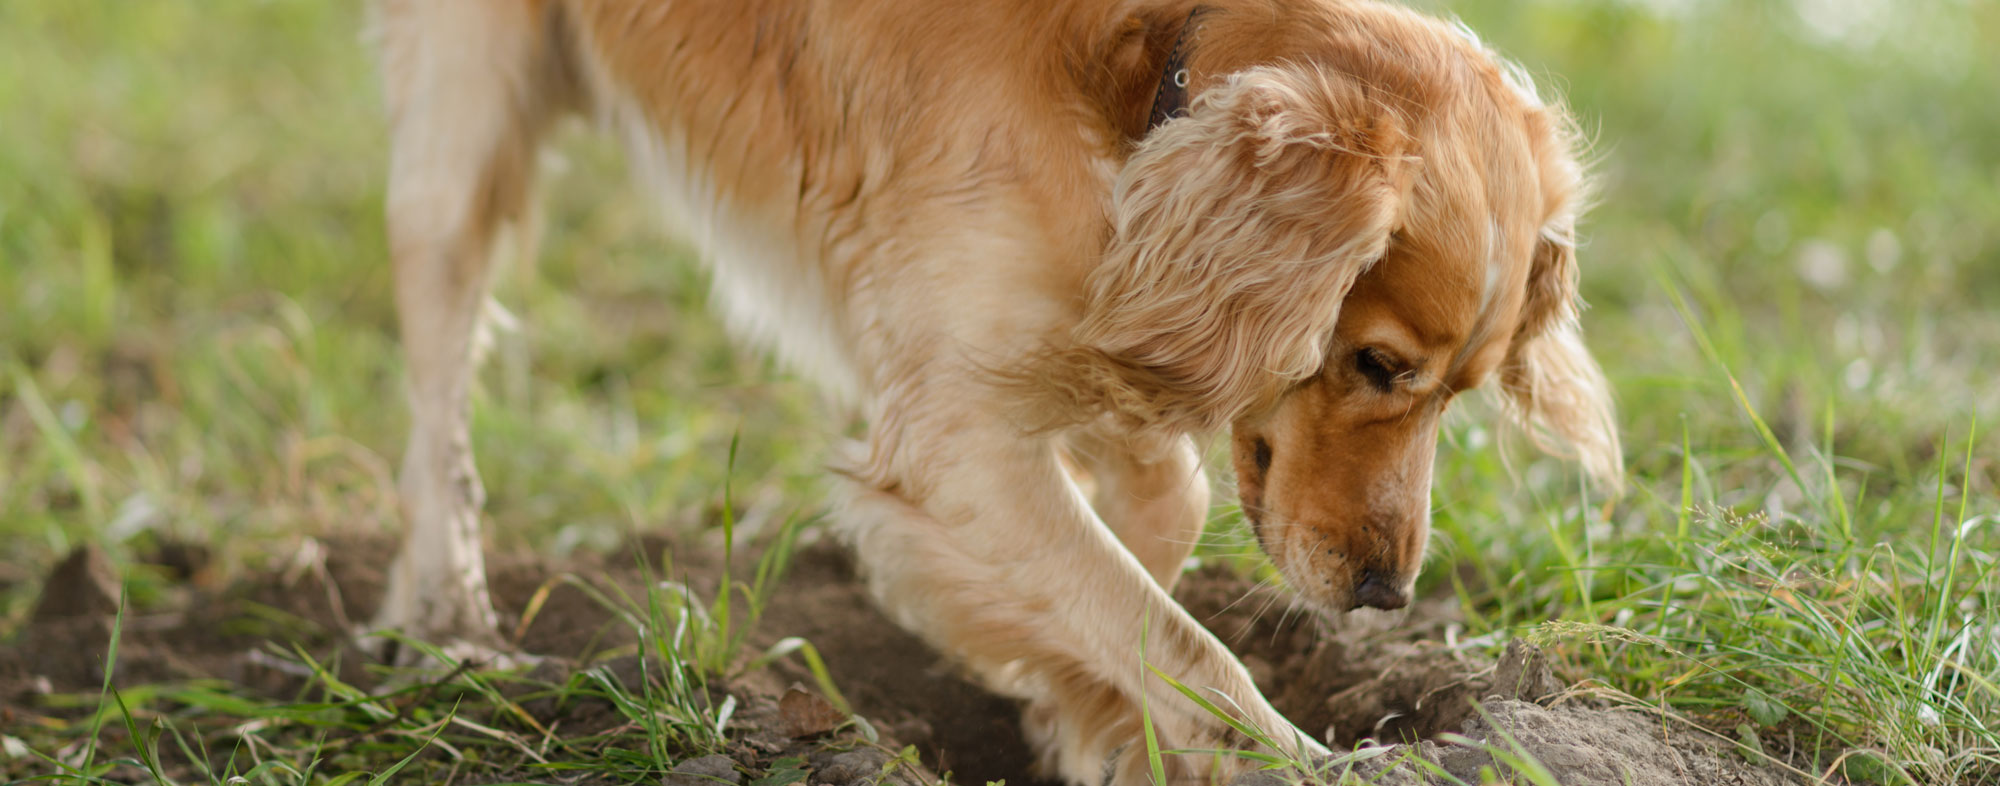 With basic training, you can stop your dog from digging holes